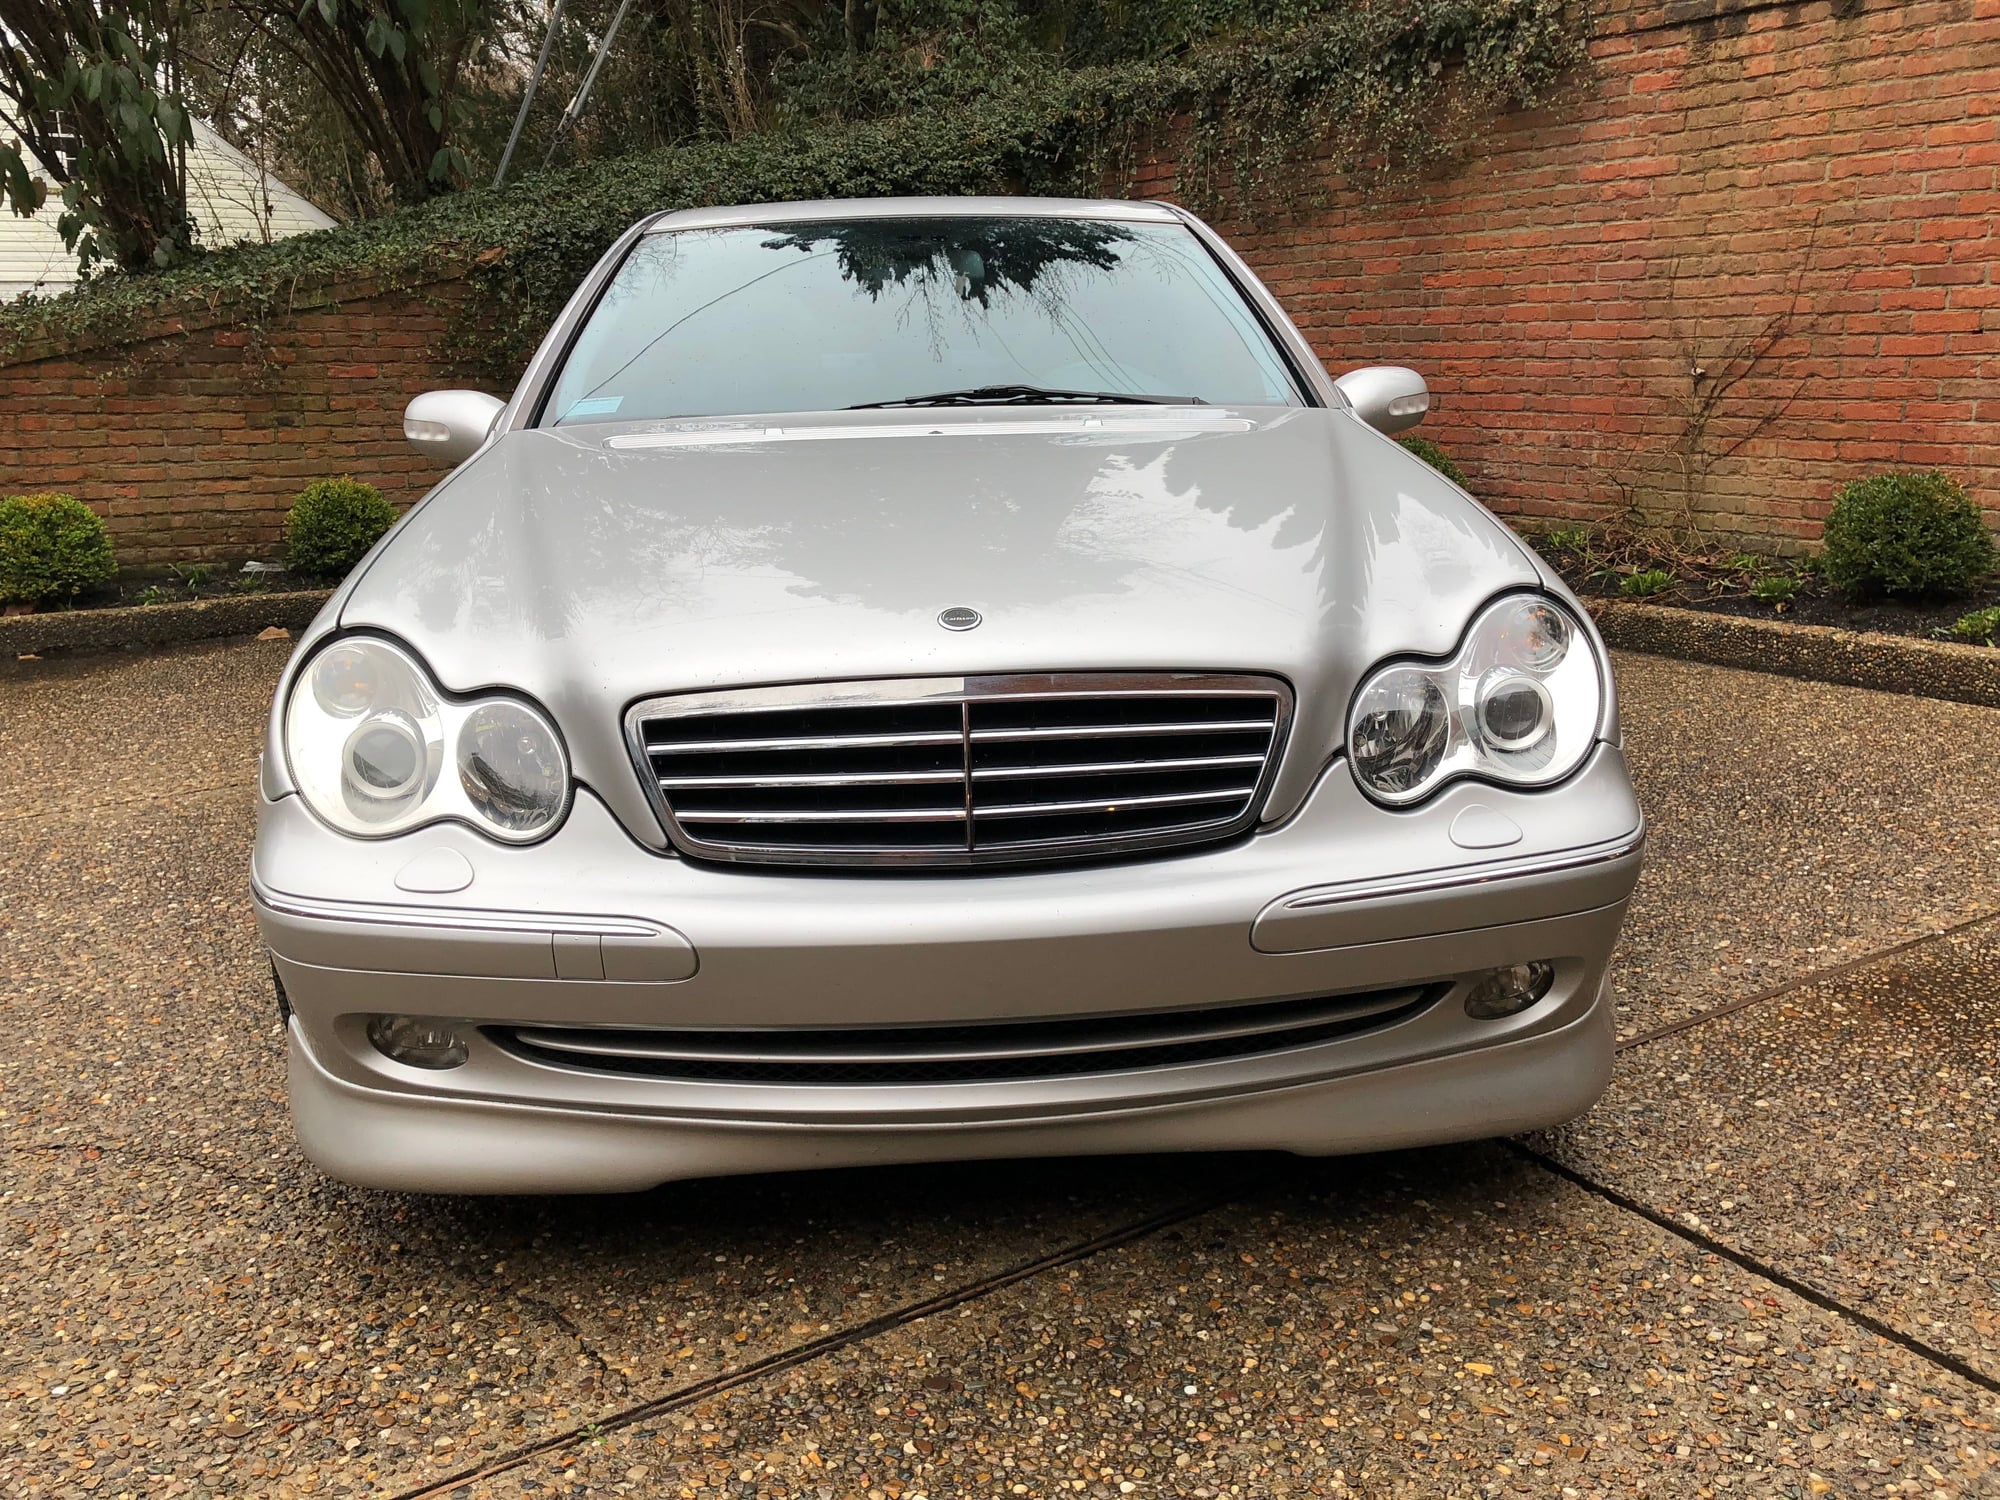 2003 Mercedes-Benz C230 - 2003 Mercedes Benz C230k with Carlsson Modifications - Used - VIN WDBRF40J93F439185 - 114,100 Miles - 4 cyl - 2WD - Manual - Sedan - Silver - Louisville, KY 40206, United States